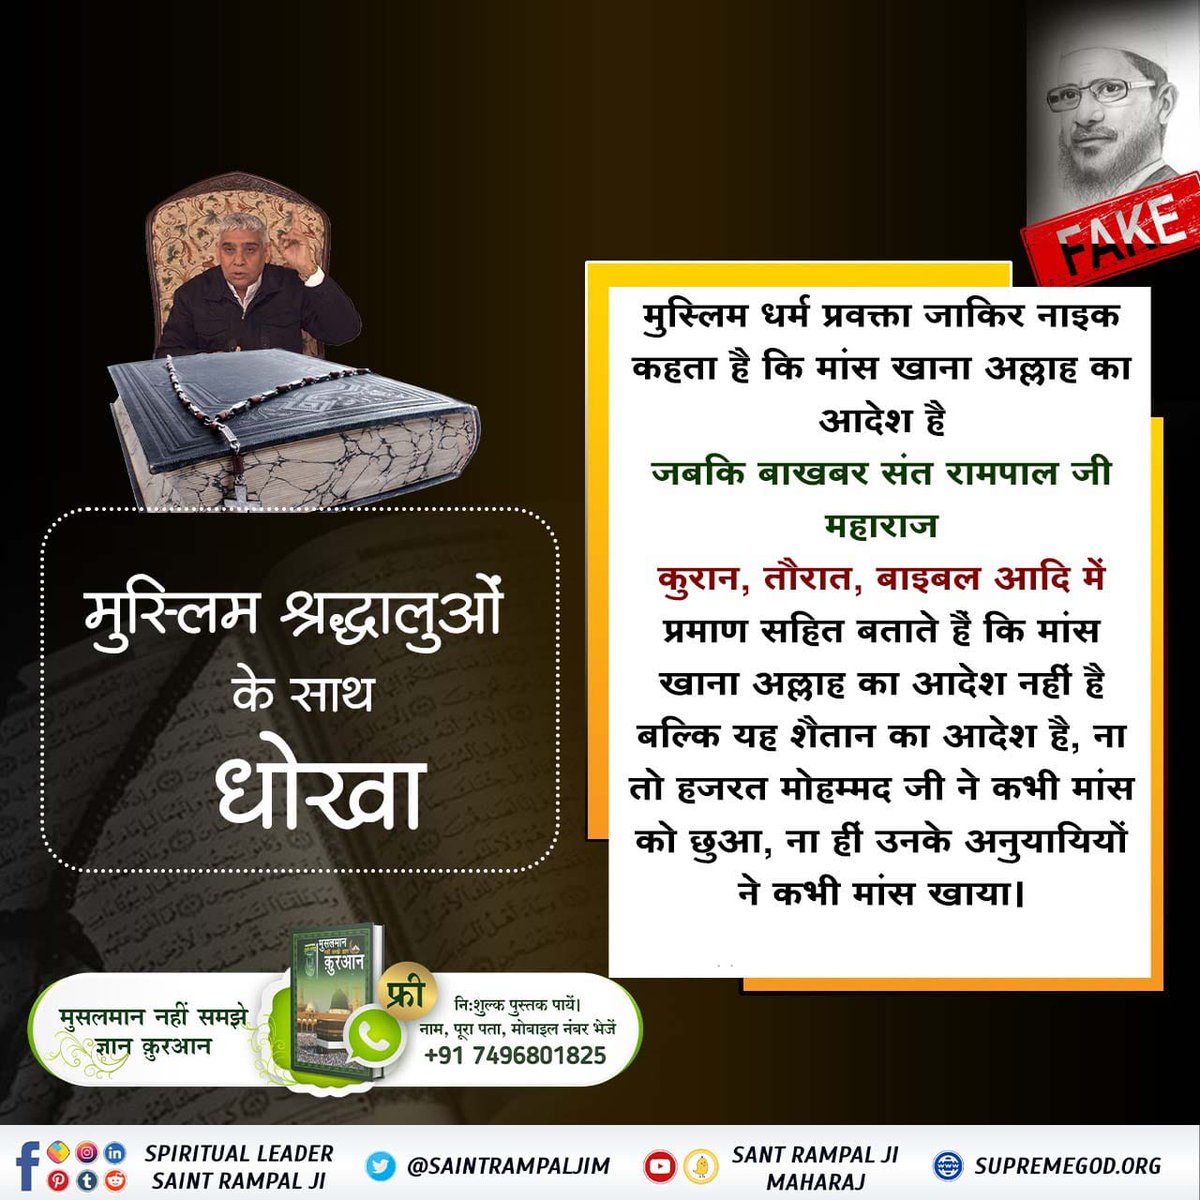 #रहम_करो_मूक_जीवों_पर Romans 14:21 It is better not to eat meat, it is better not to drink alcohol, and it is better not to do anything that will push your brother into sin.